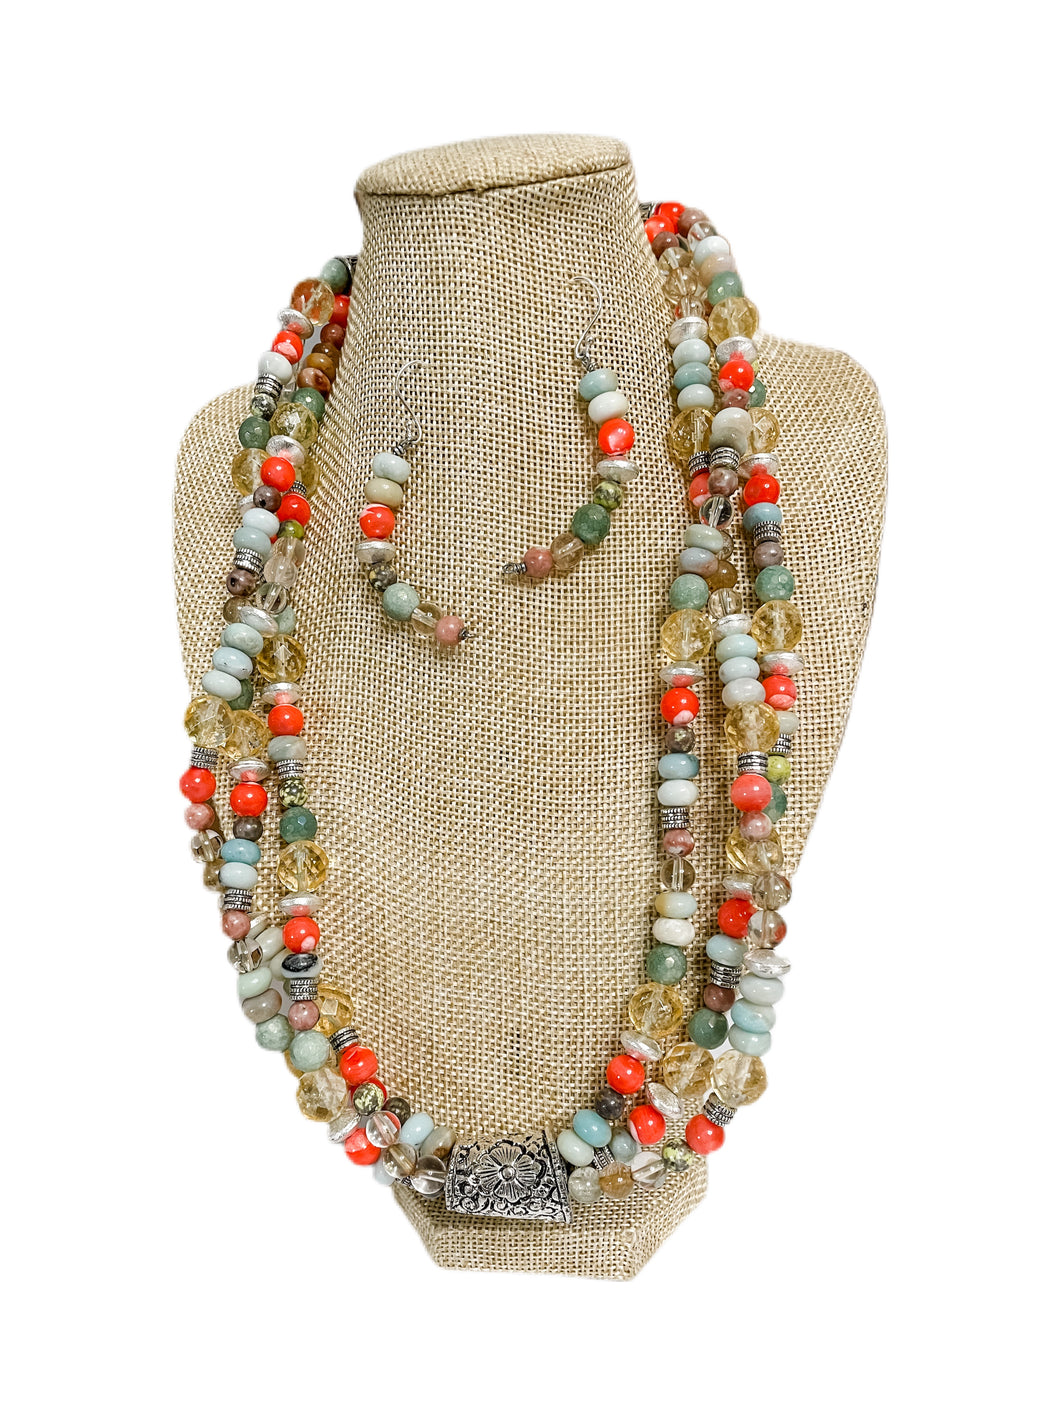 Coral Necklace & Earrings Set